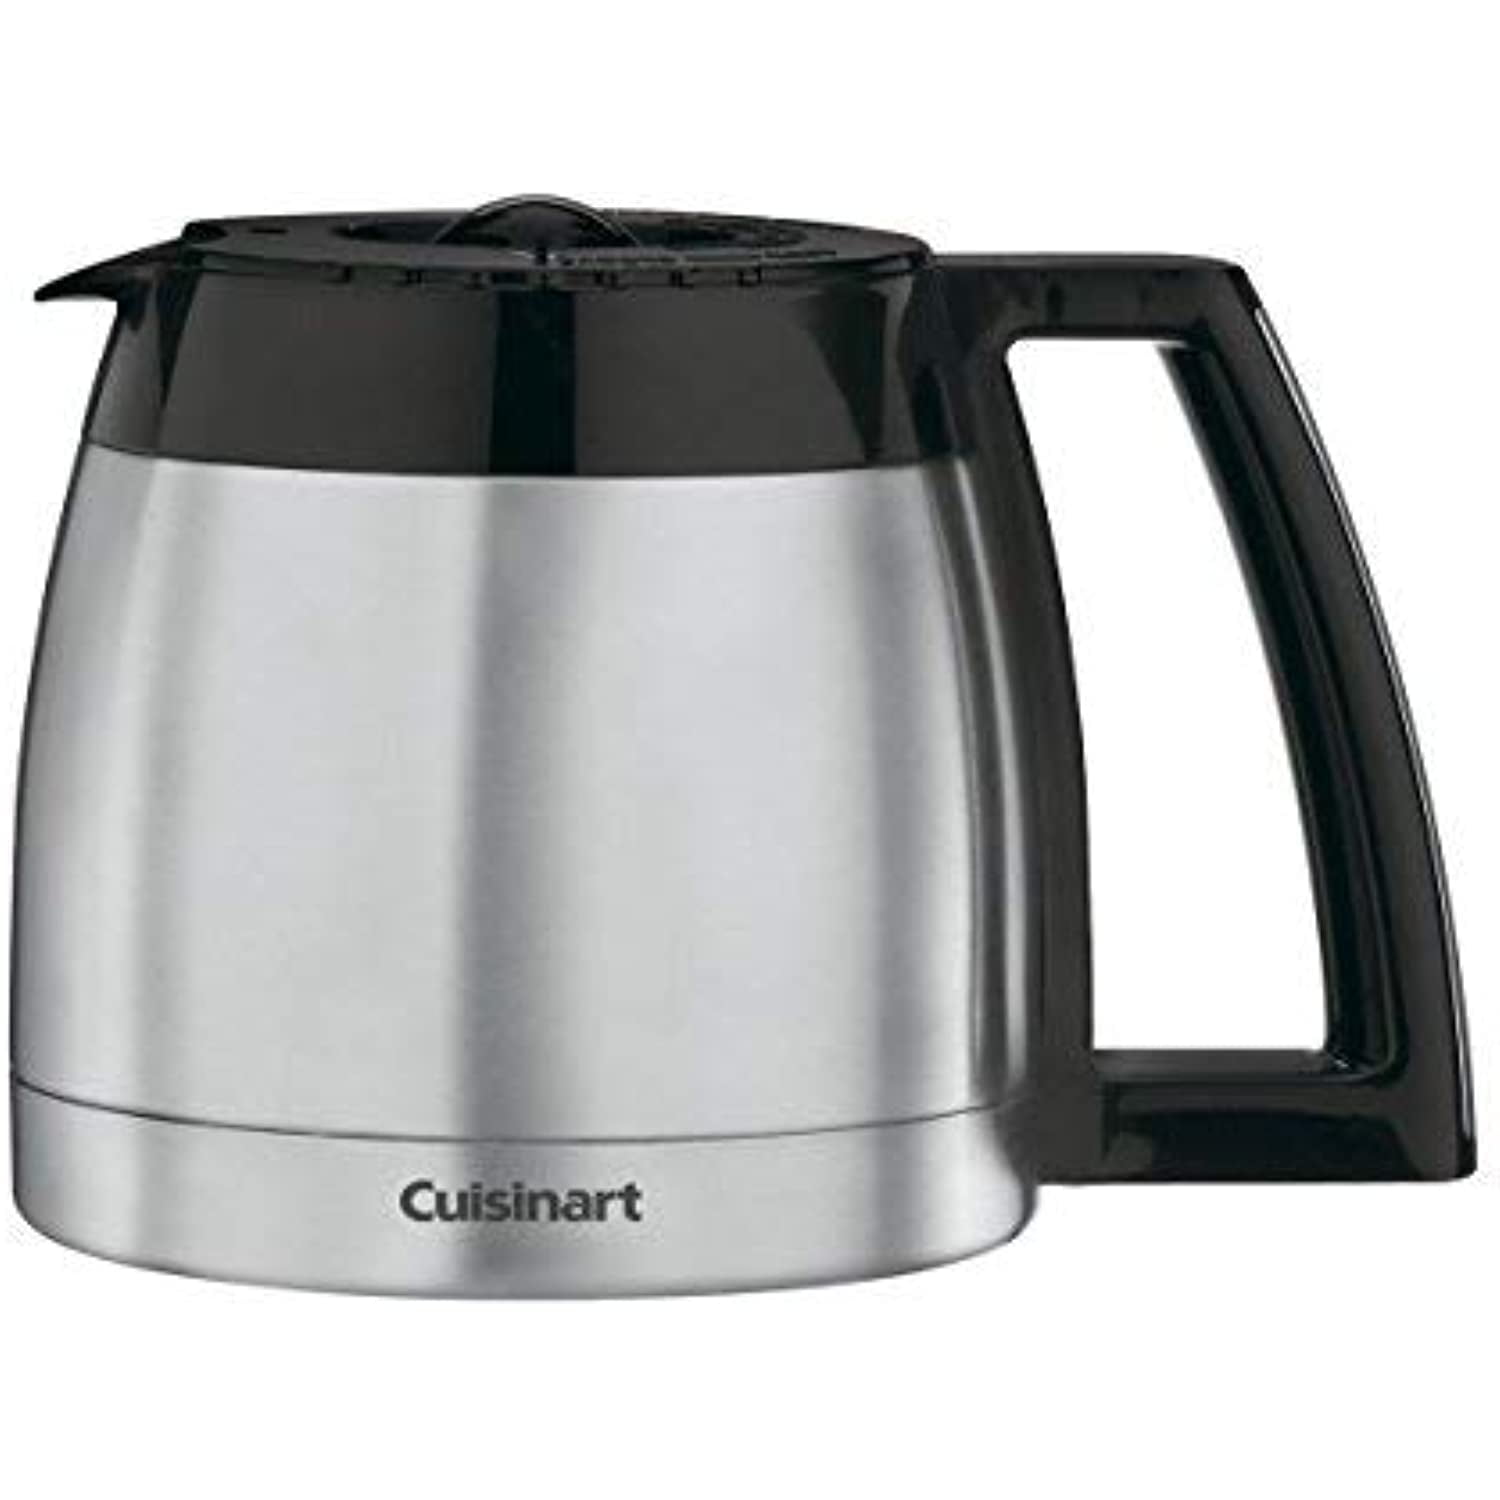 Cuisinart pro 220 volts Bean to cup coffee maker with insulated carafe jug built  in burr grinder 220v 240 volt 50 hz